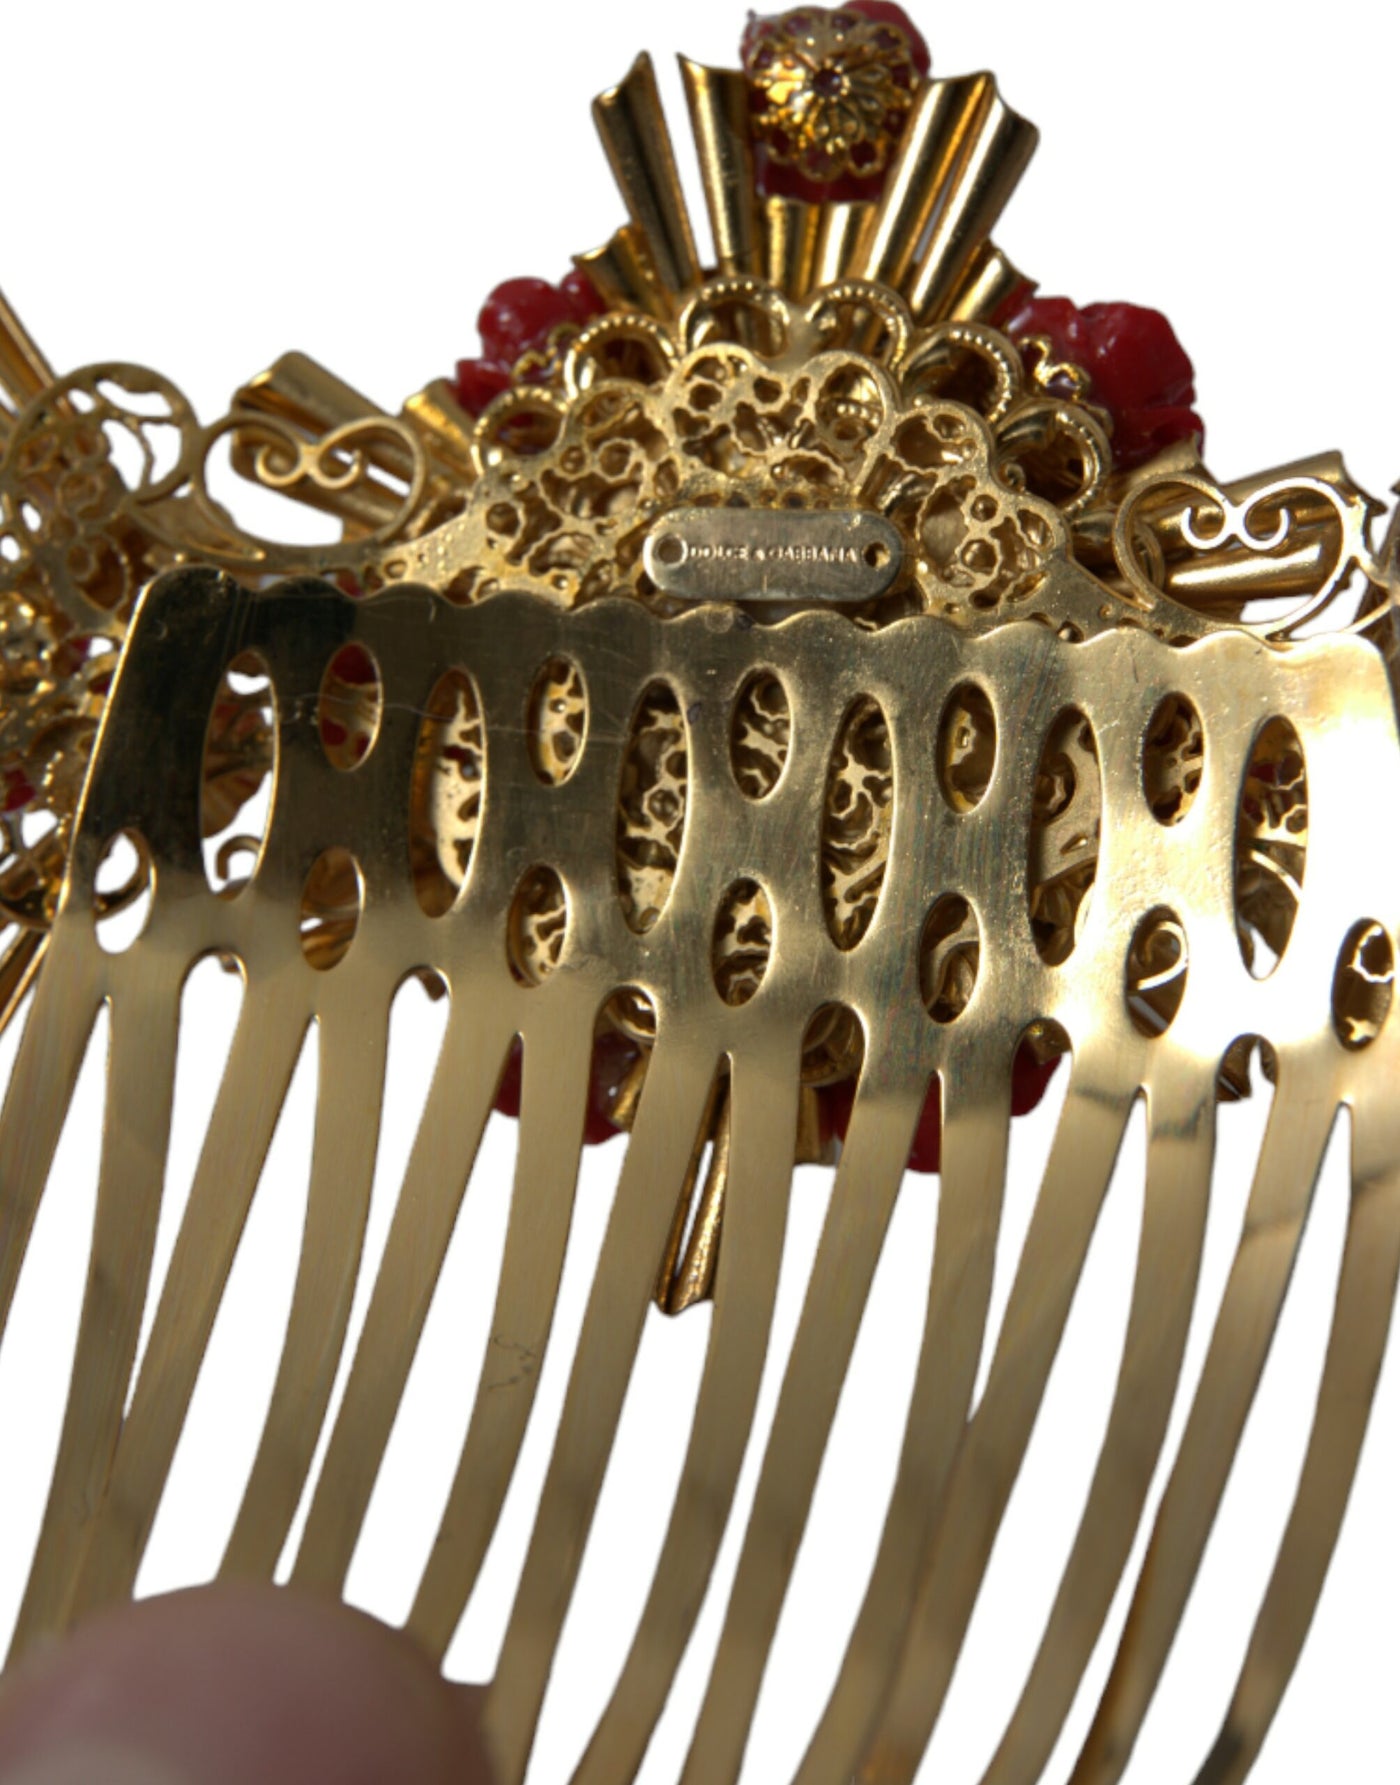 Gold Brass Crystal Heart Floral Hair Comb